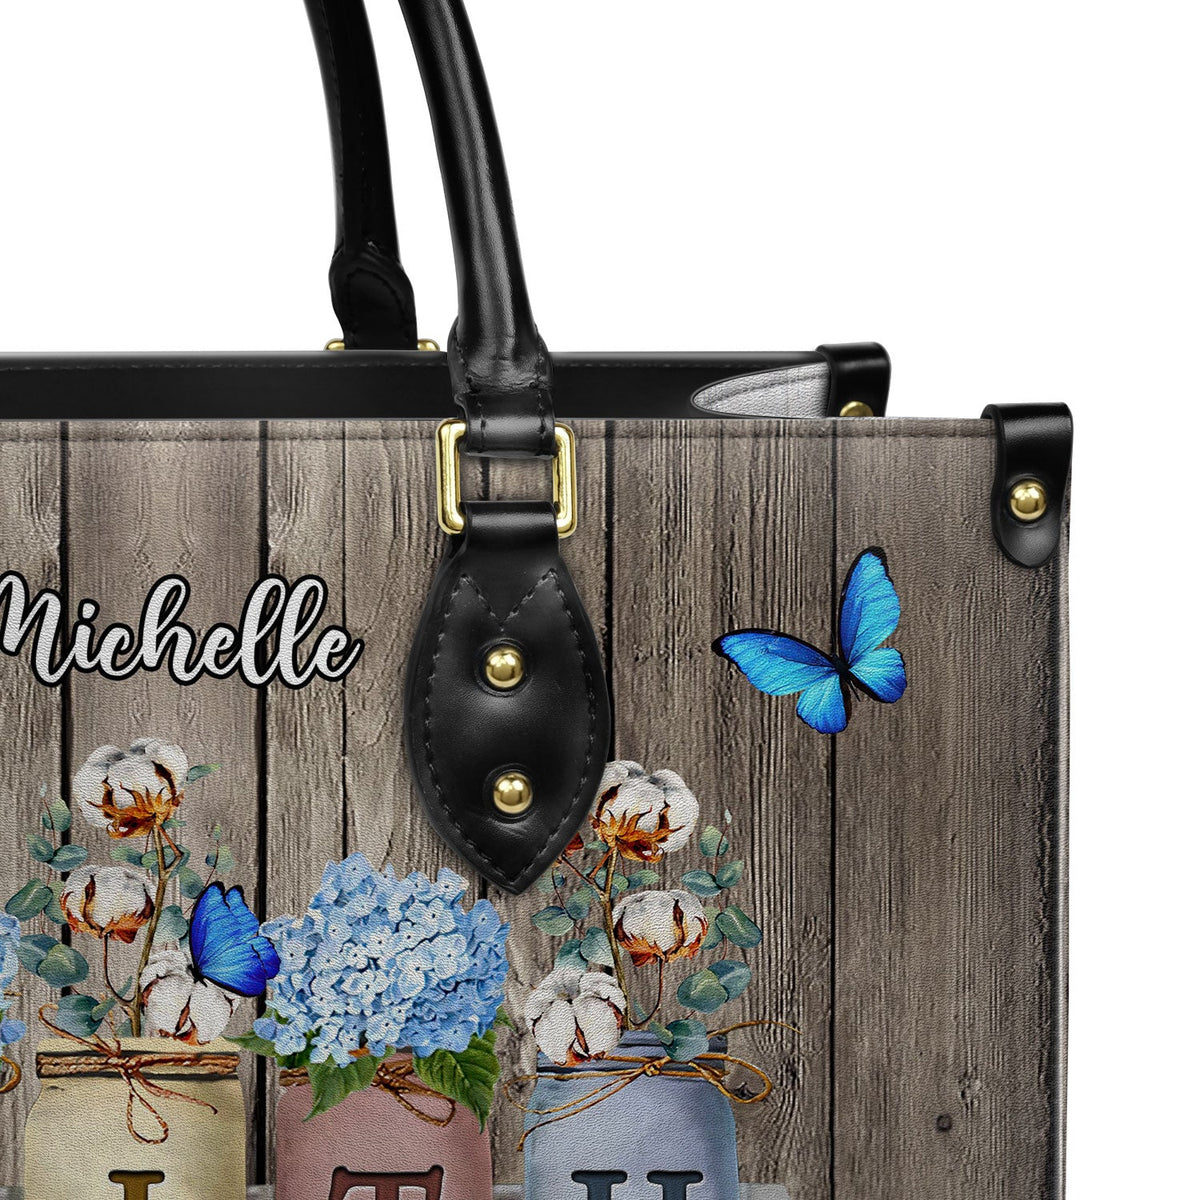 This Handbag Has to Be Made Perfectly on the First Try - The New